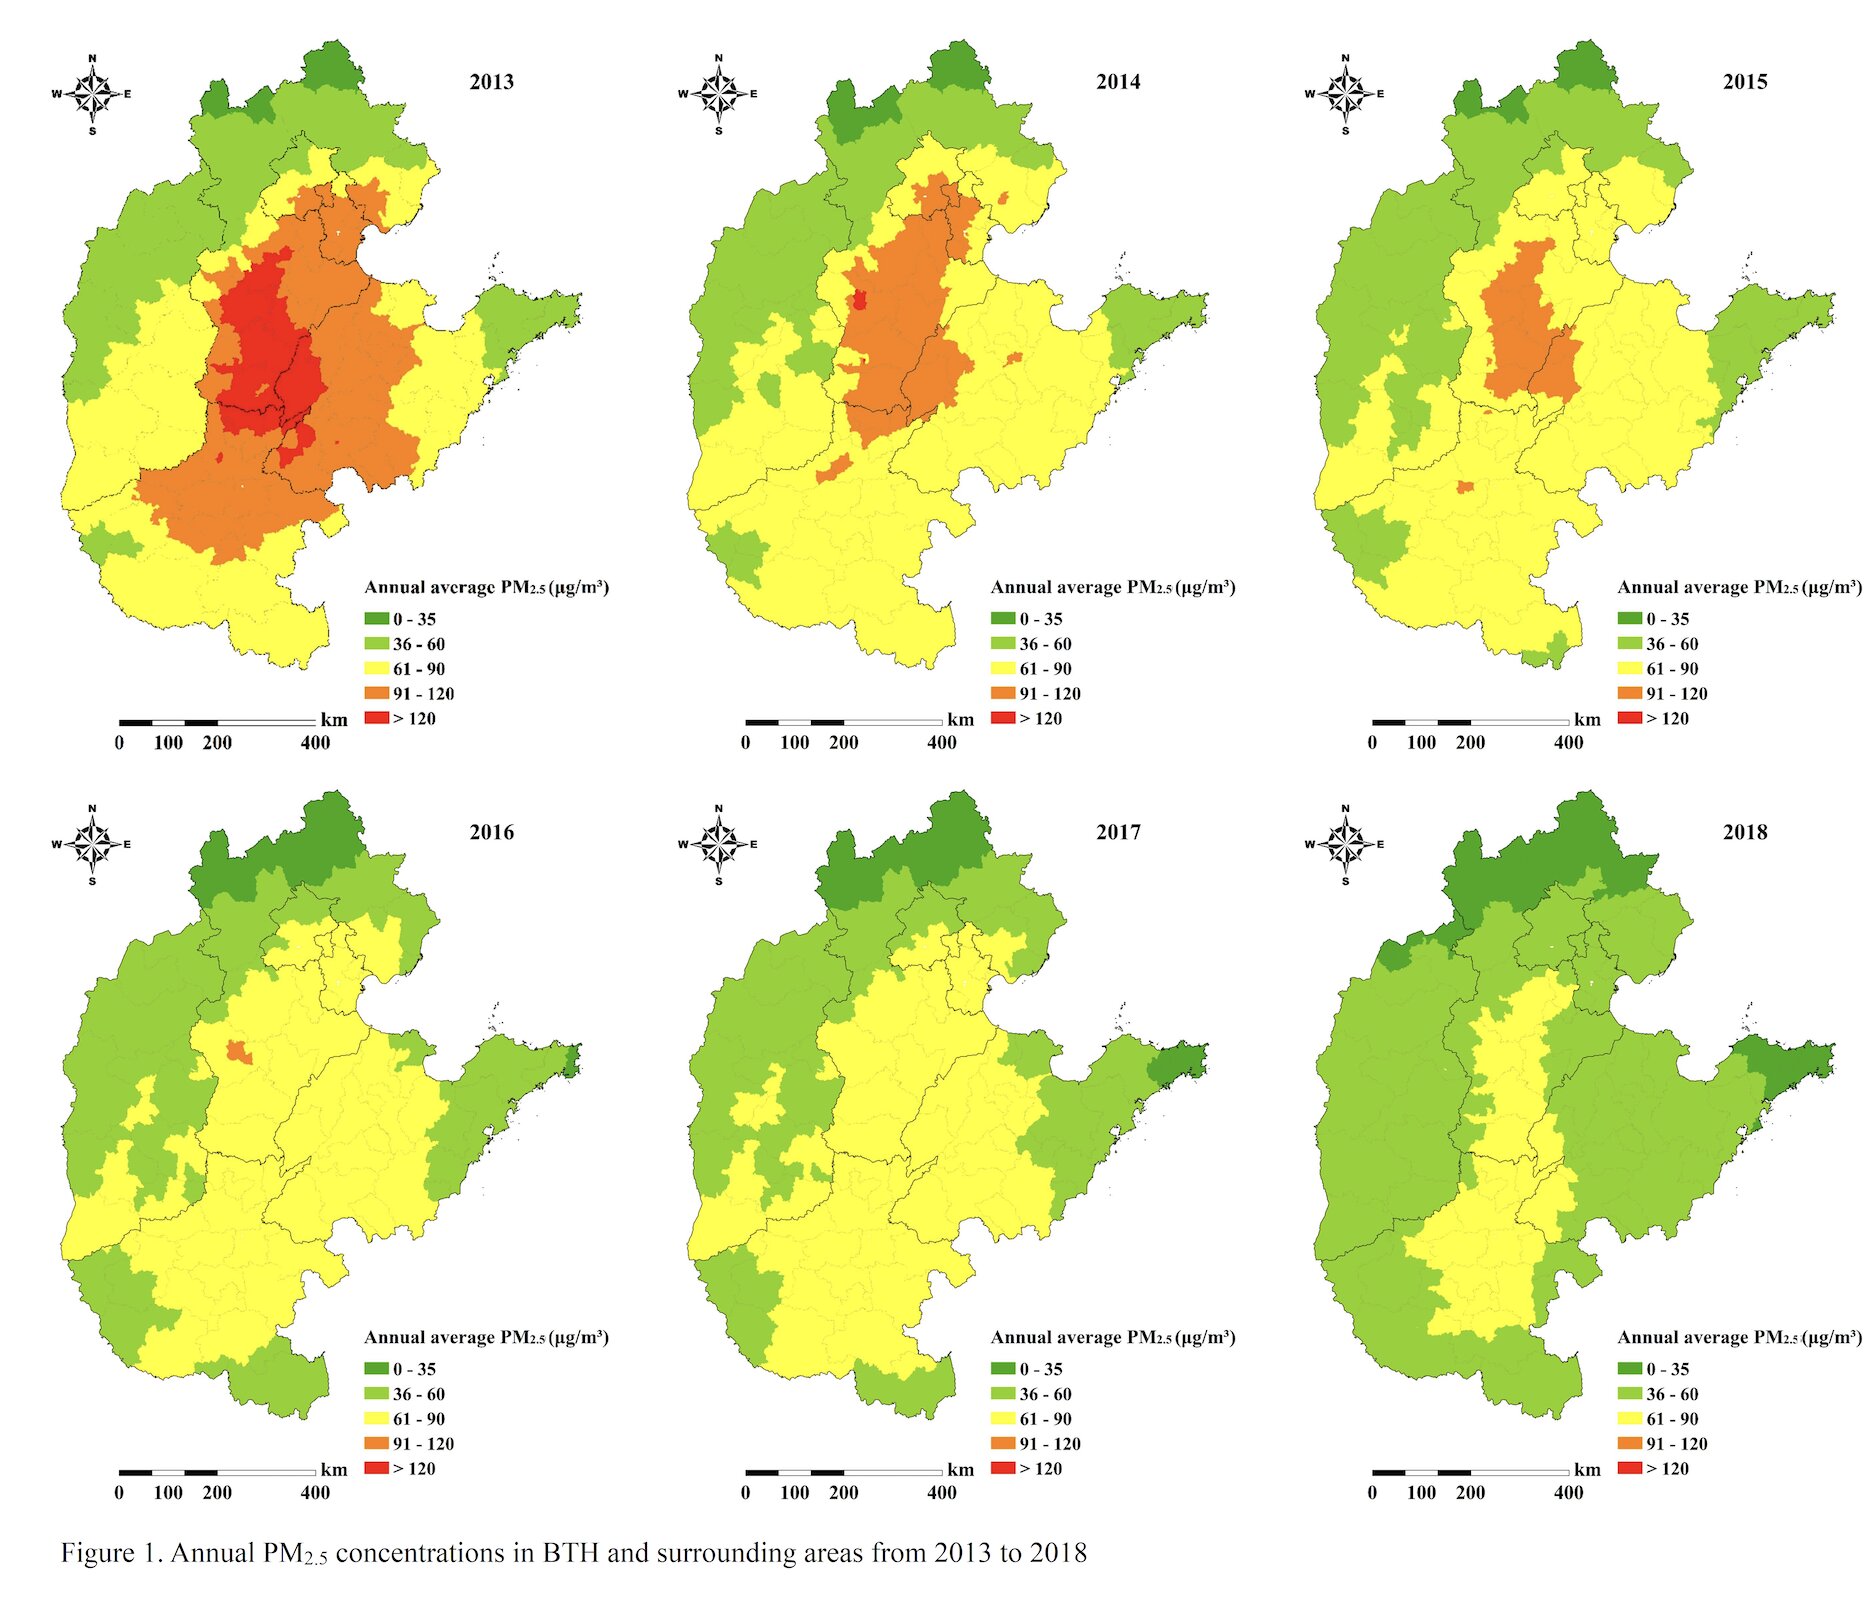 Investigating coal emissions reductions and mortality in China